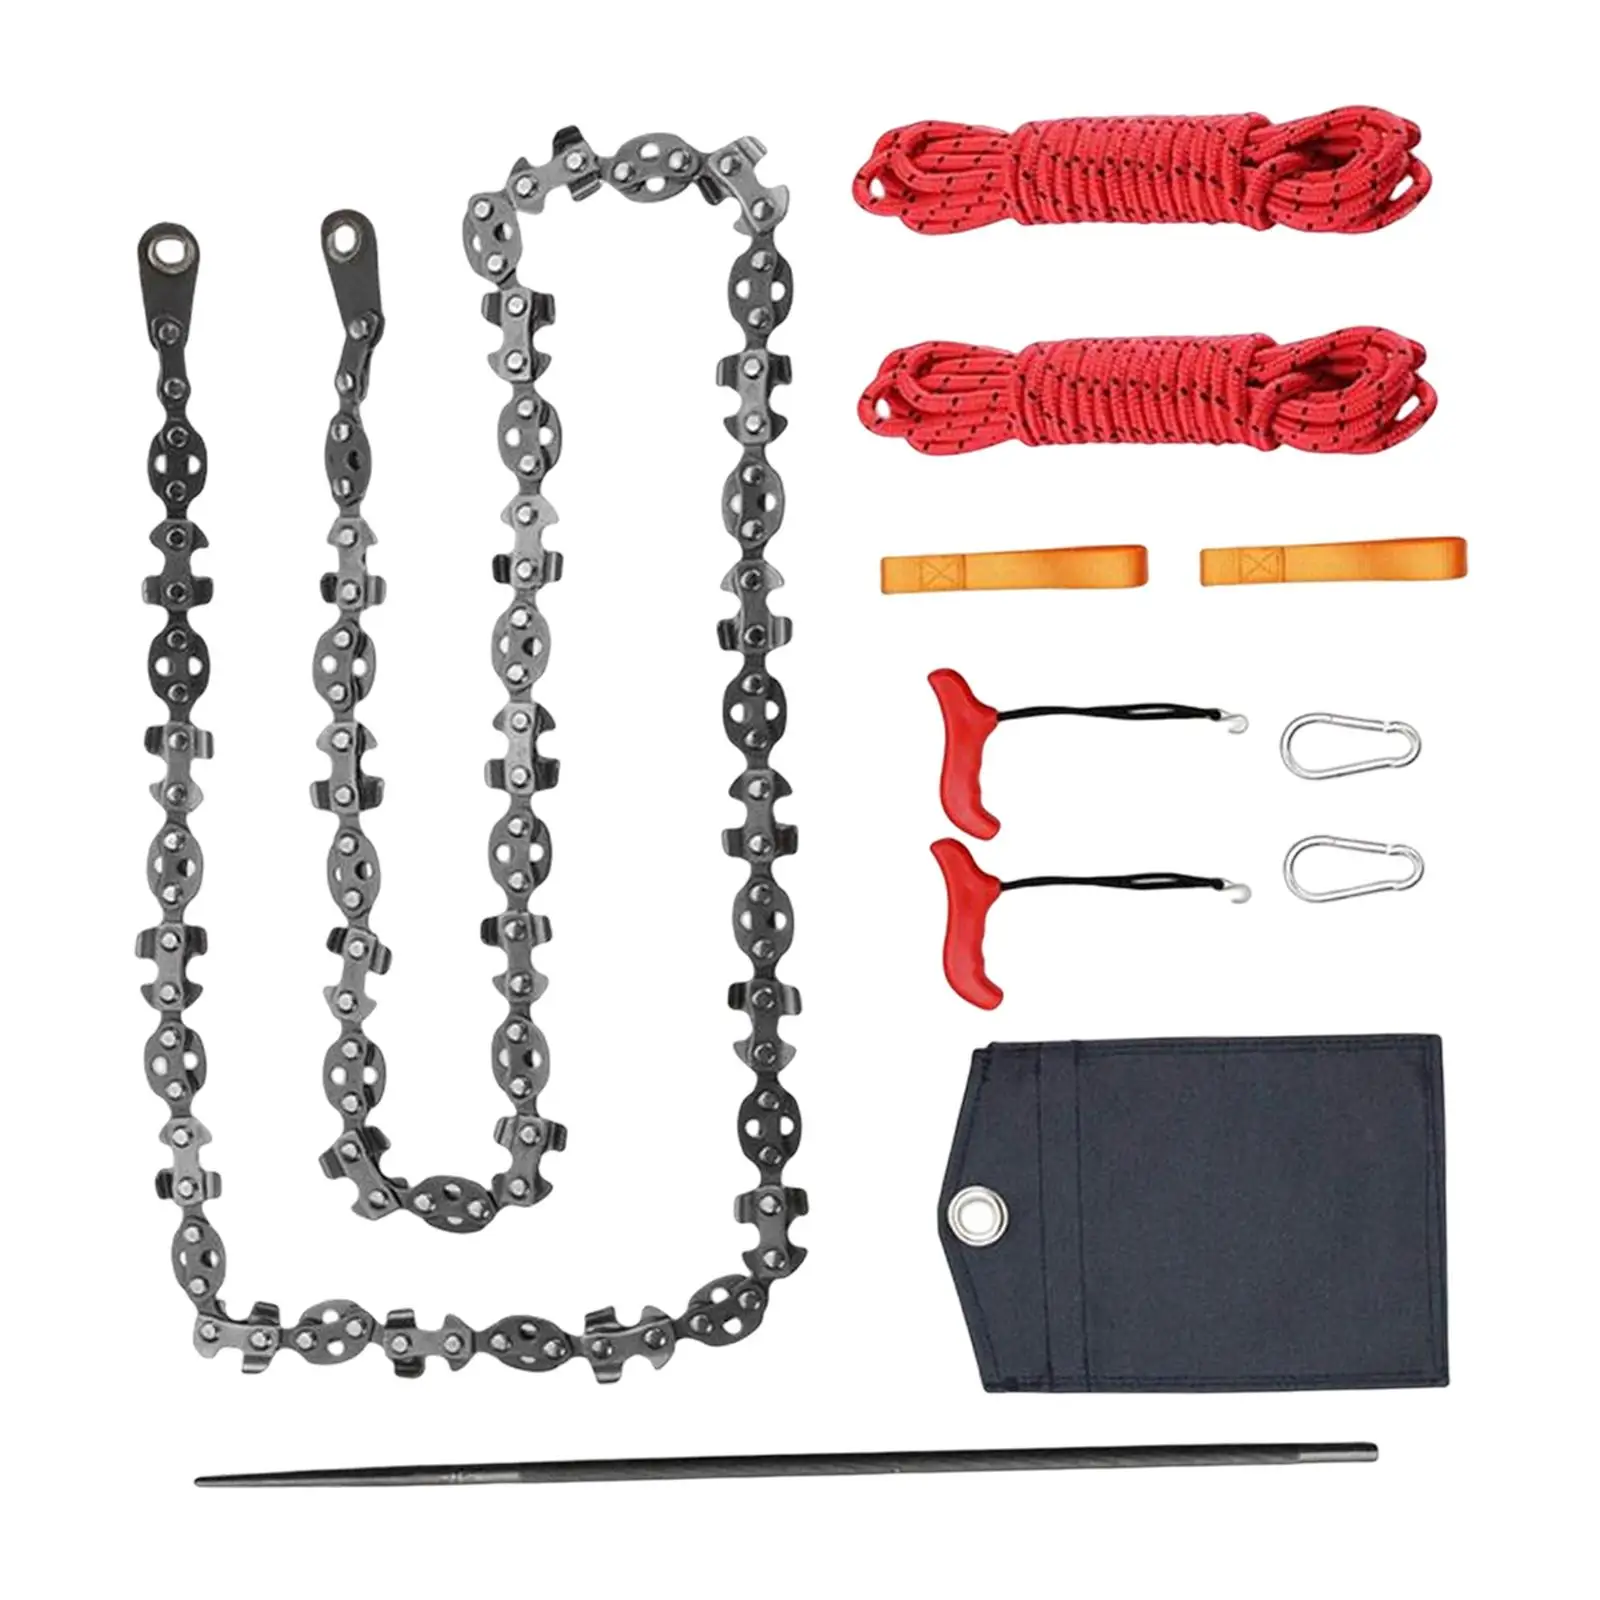 Portable Outdoor Survival Hand Zipper Saw Wire Saw Handheld Chains Saw Wood Cutting Tool